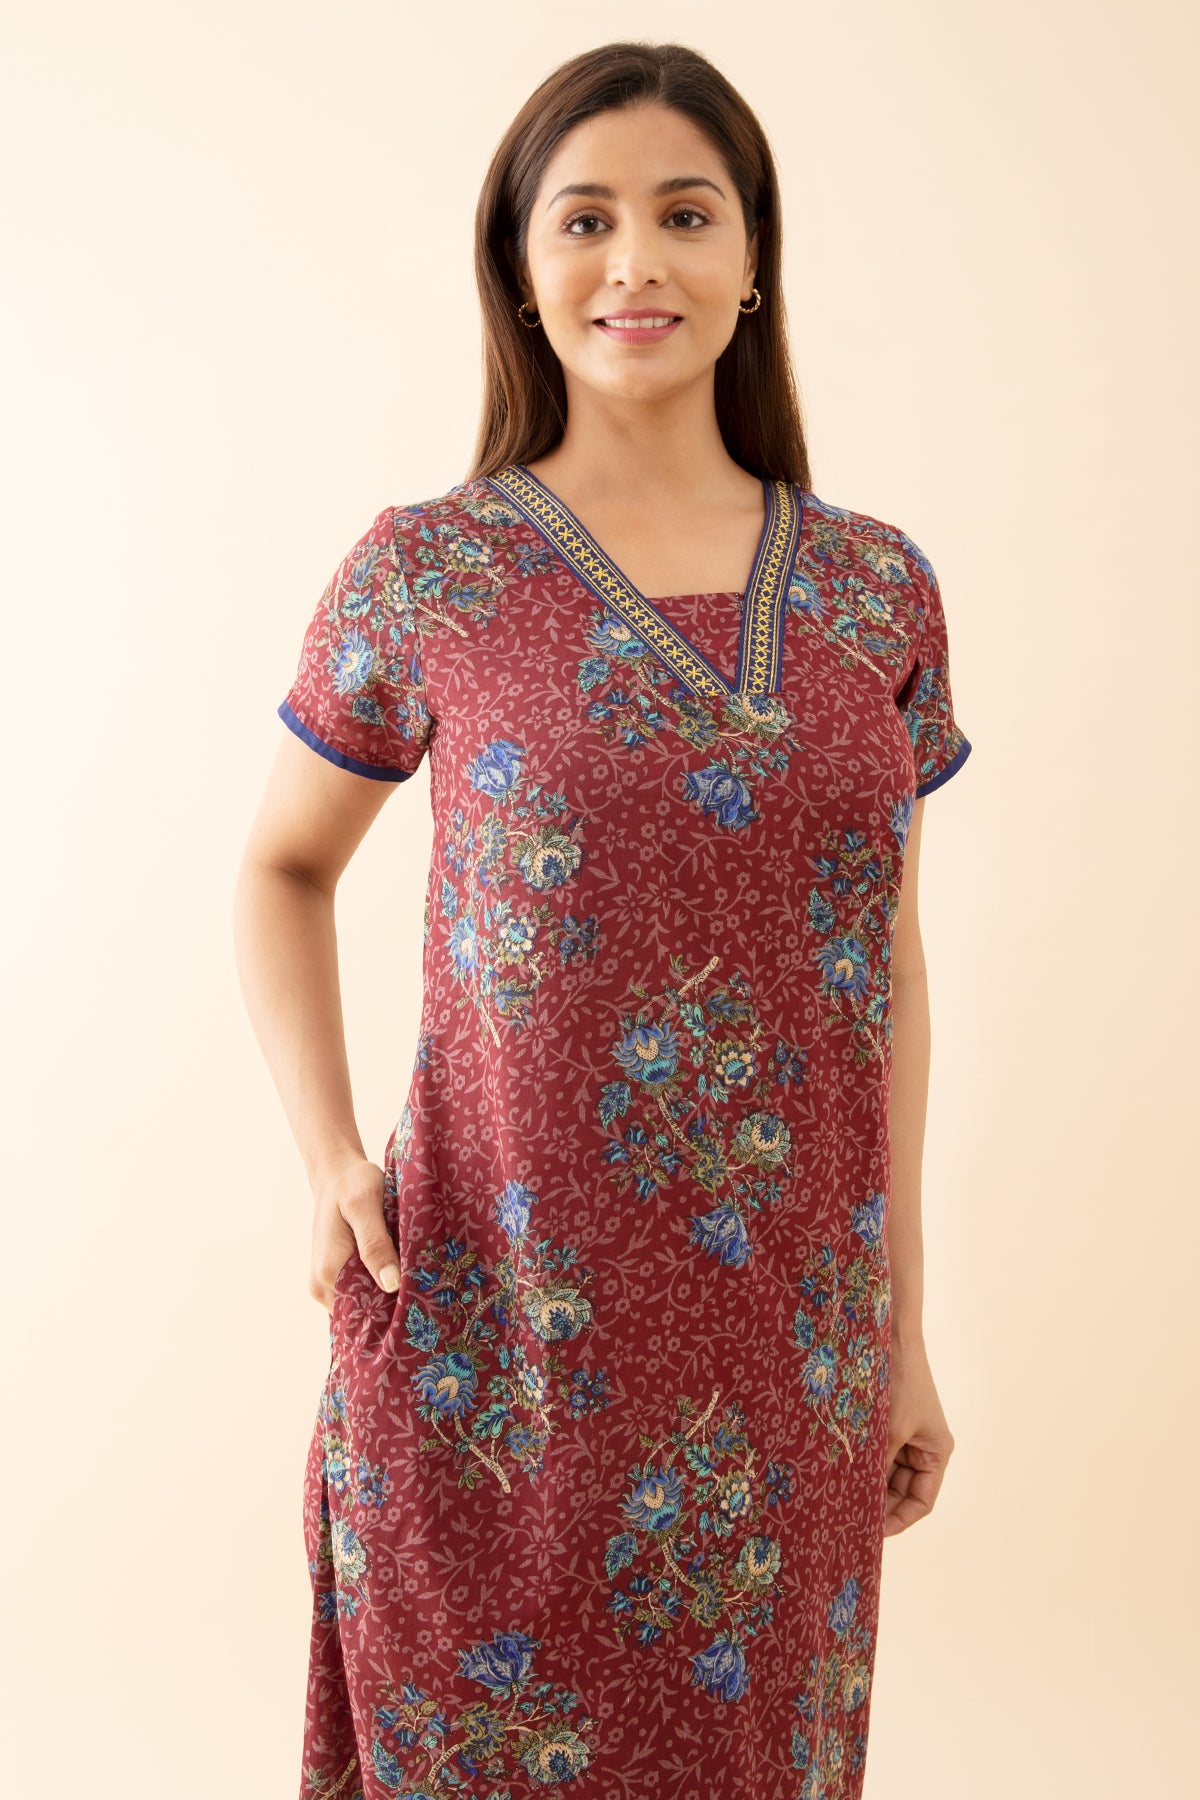 Baroque Floral Printed Nighty with Contrast Embroidered Neckline Maroon